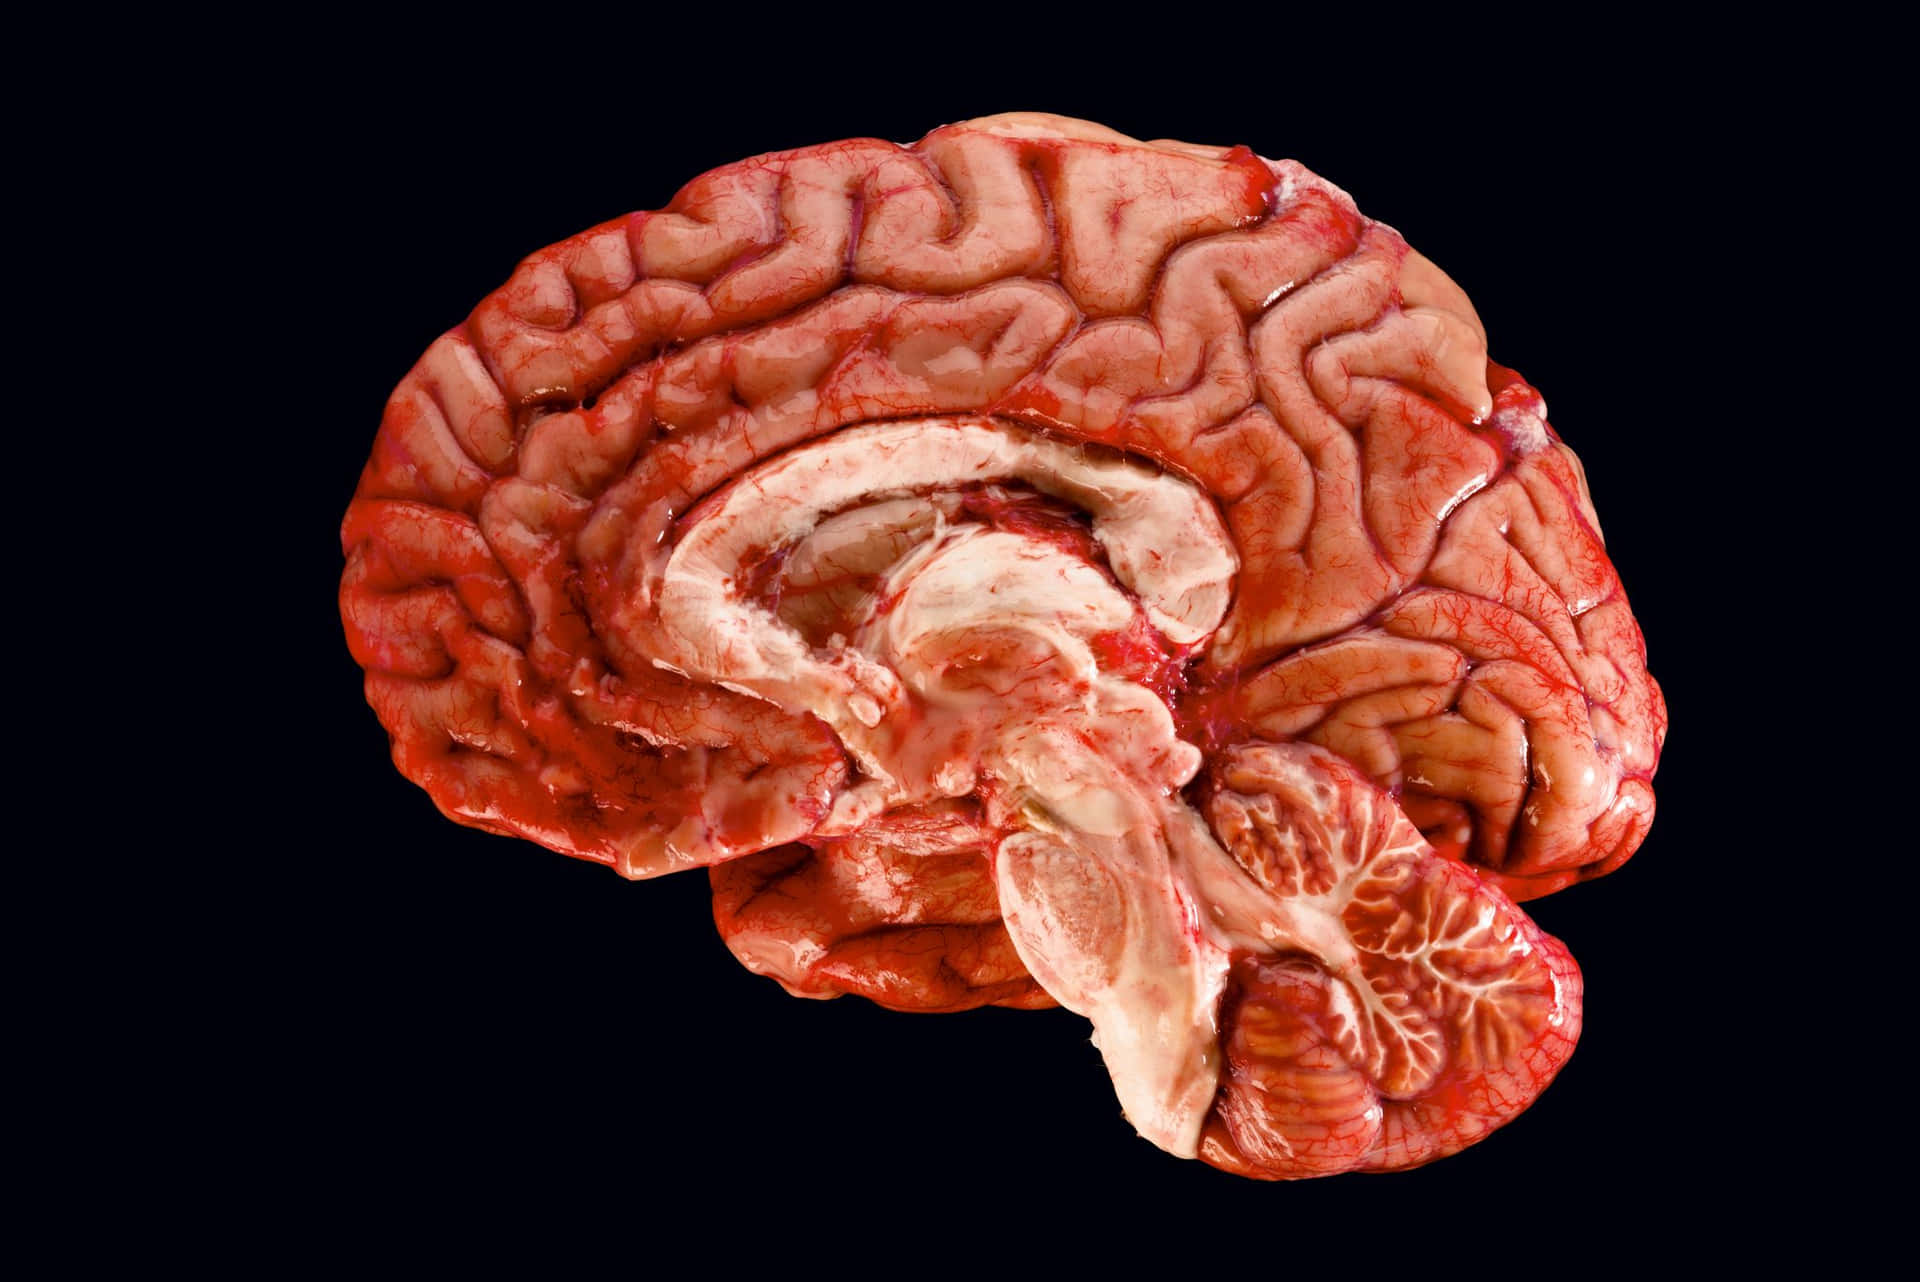 A Human Brain Is Shown On A Black Background Wallpaper